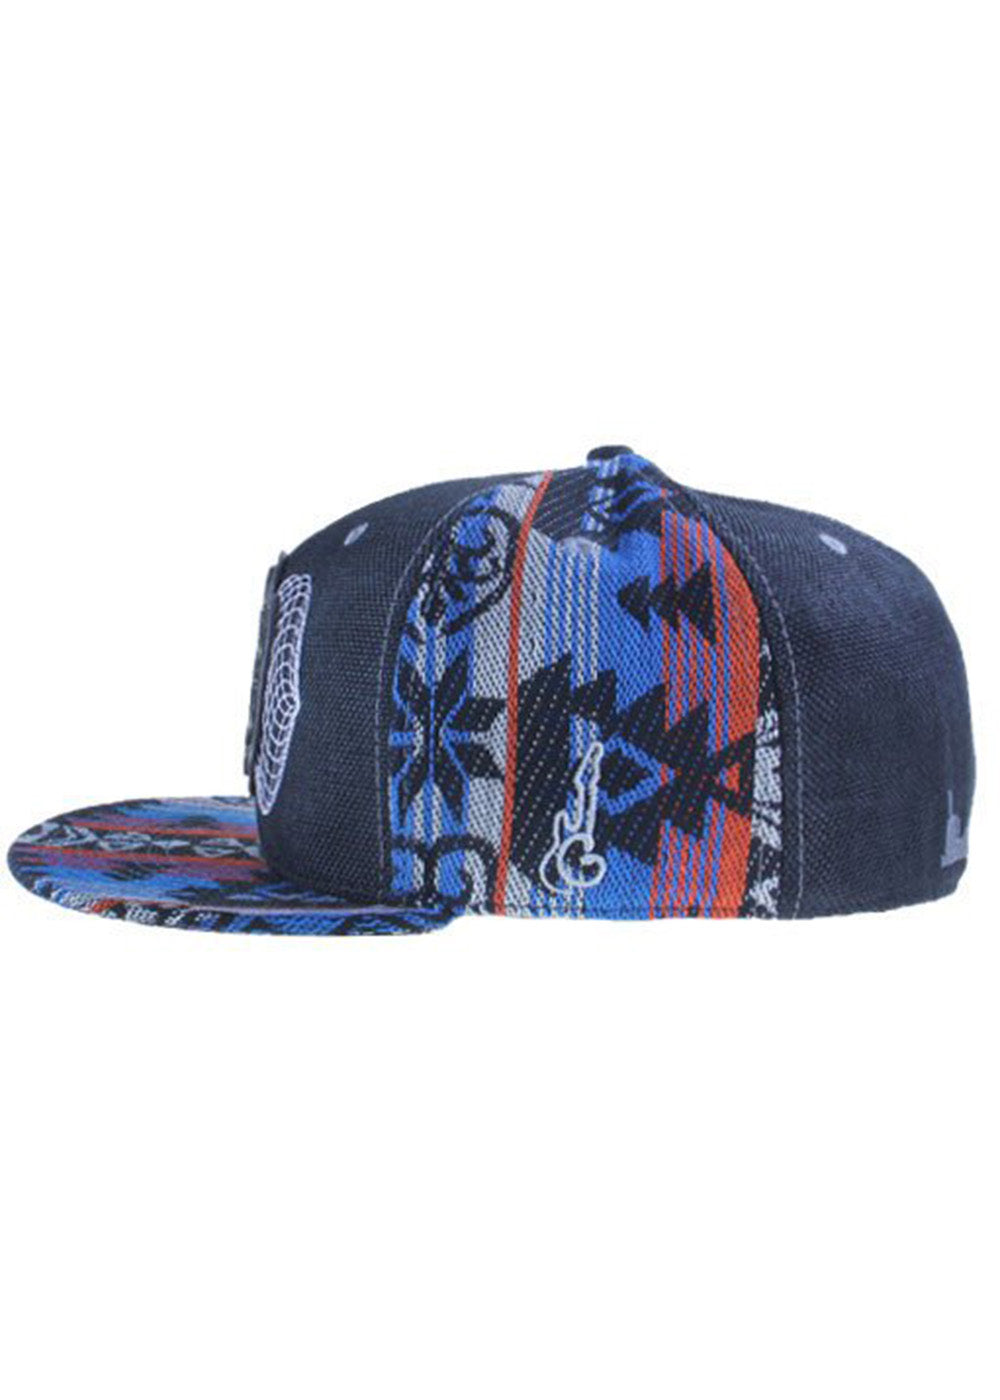 Grassroots Bass Physics Andes Black Fitted Hat